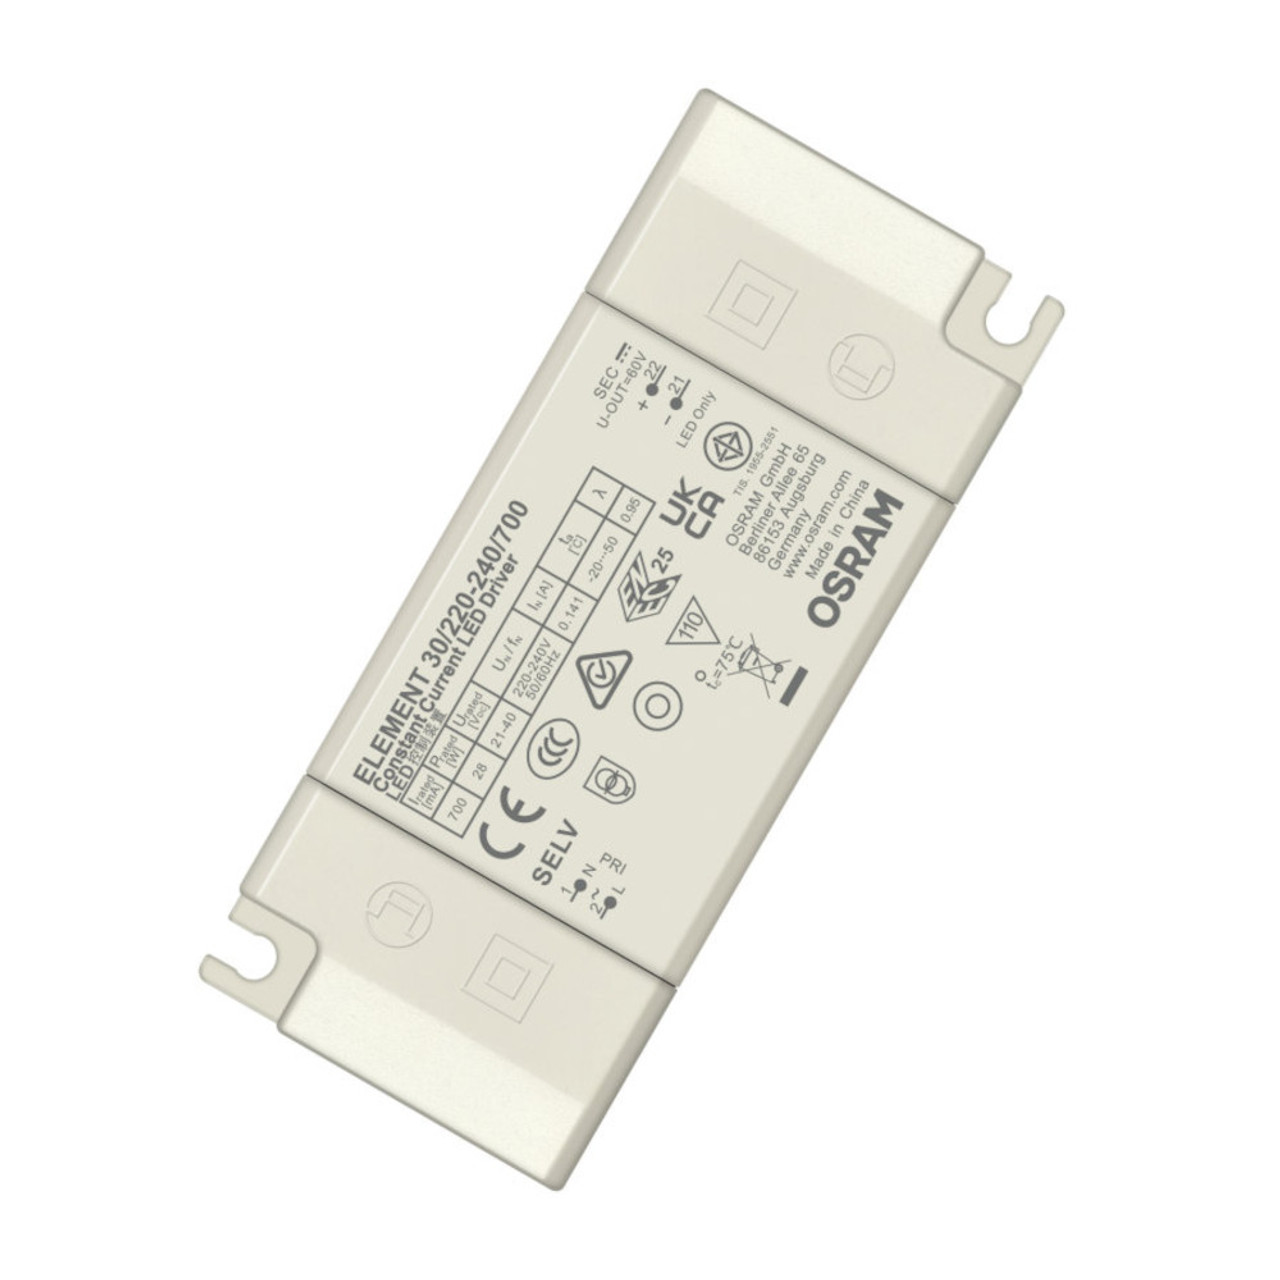 Osram Element G4 30W 700mA Constant Current LED Driver